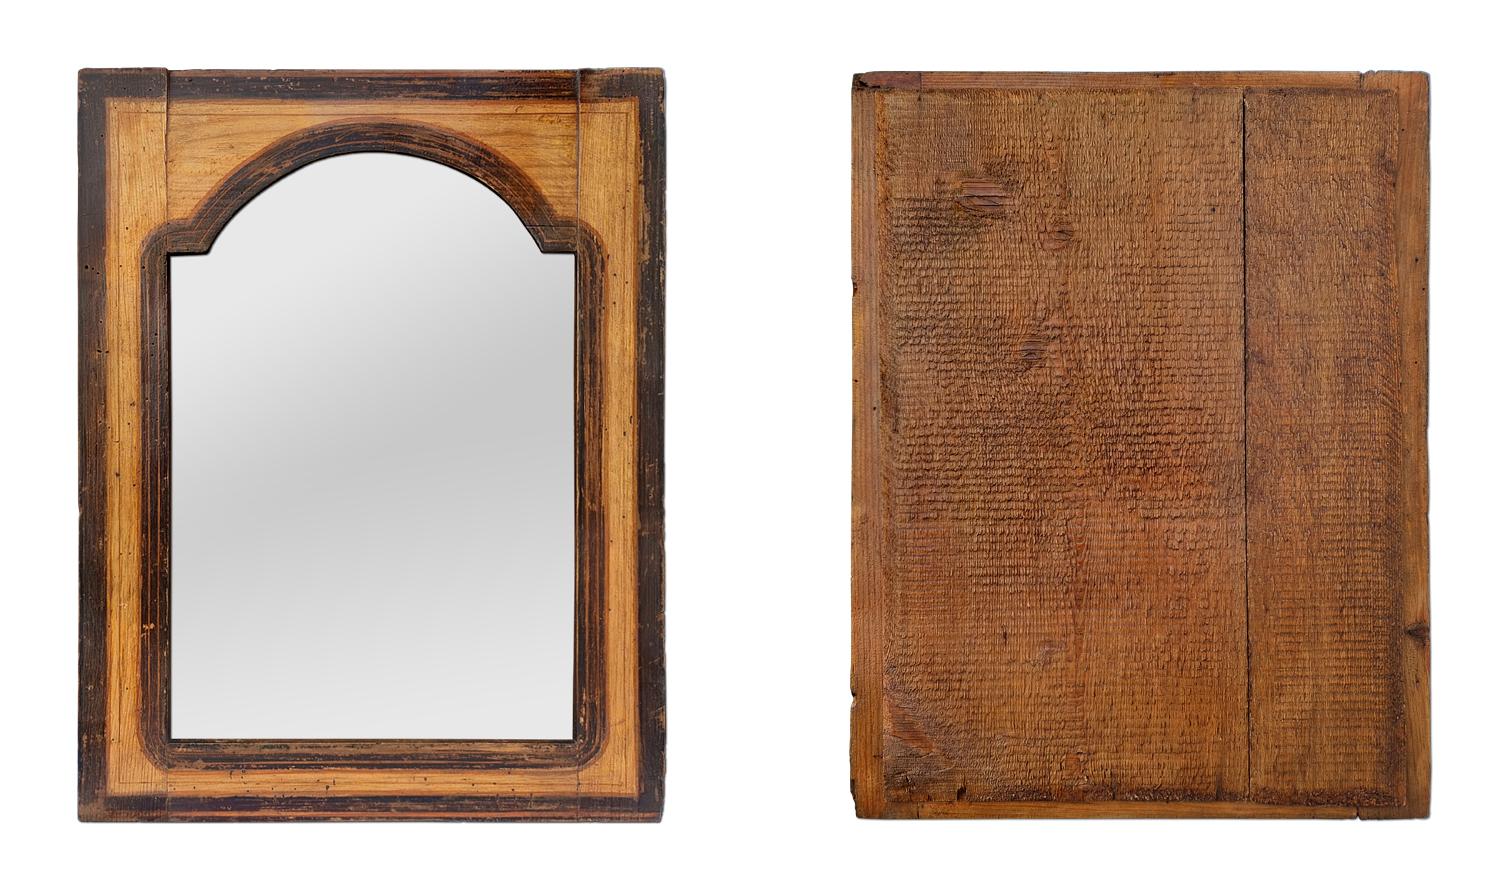 Hand-Crafted Small Antique Wall Mirror in Polychrome Wood, circa 1890 For Sale